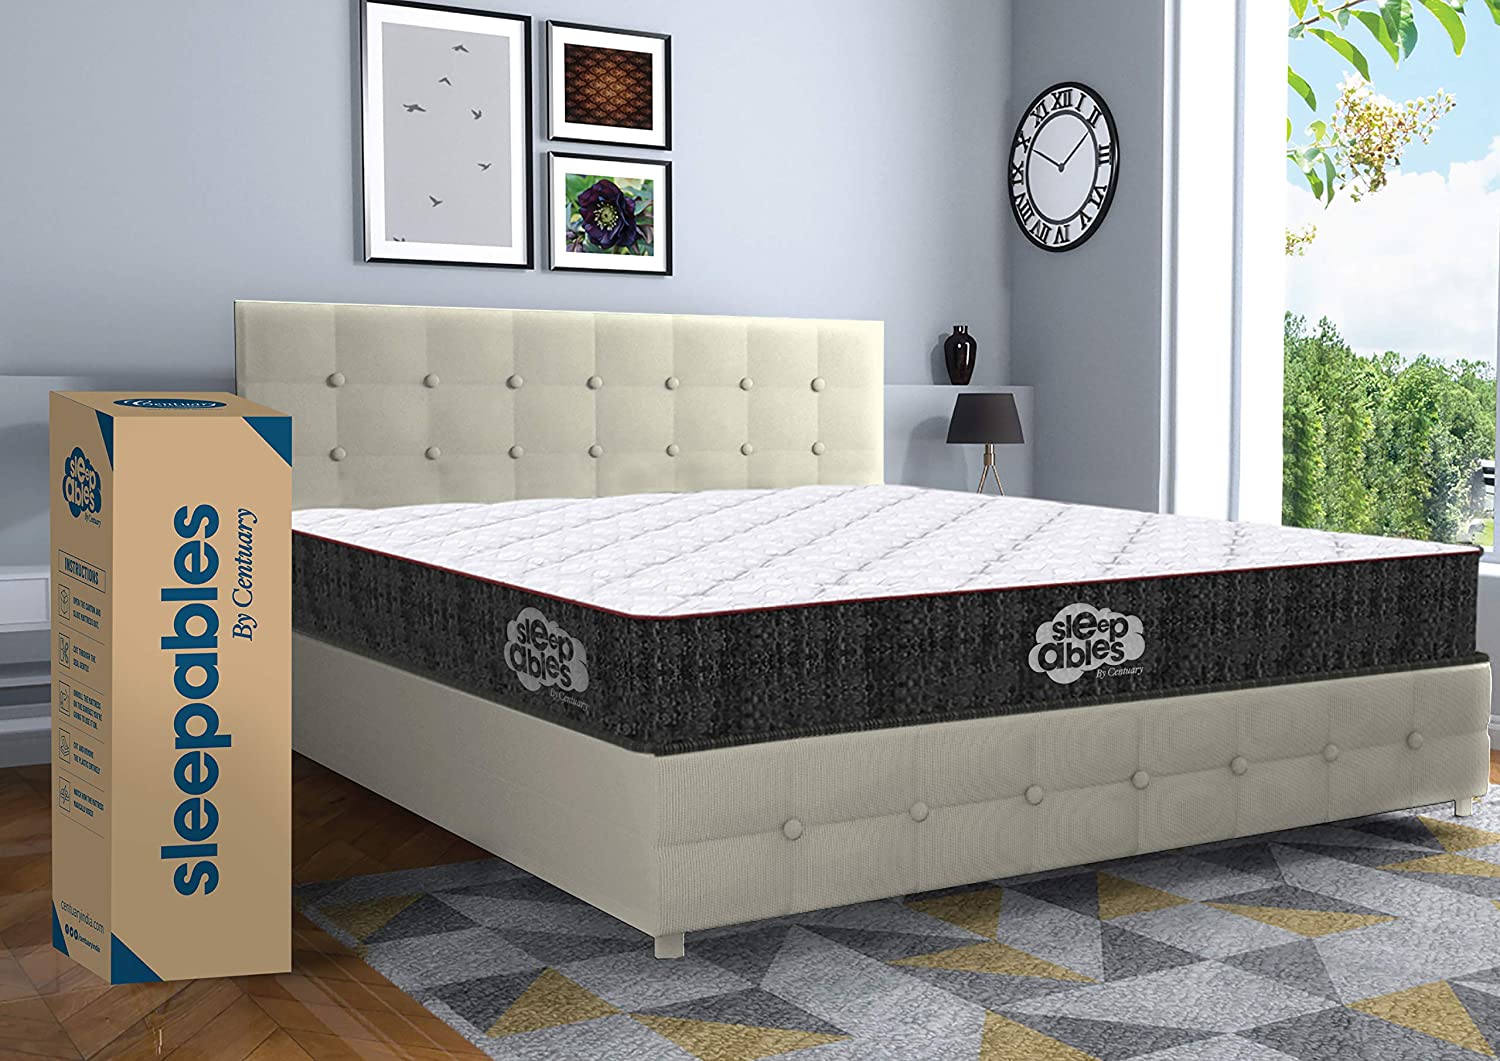 Double Mattress Cost And Pricing